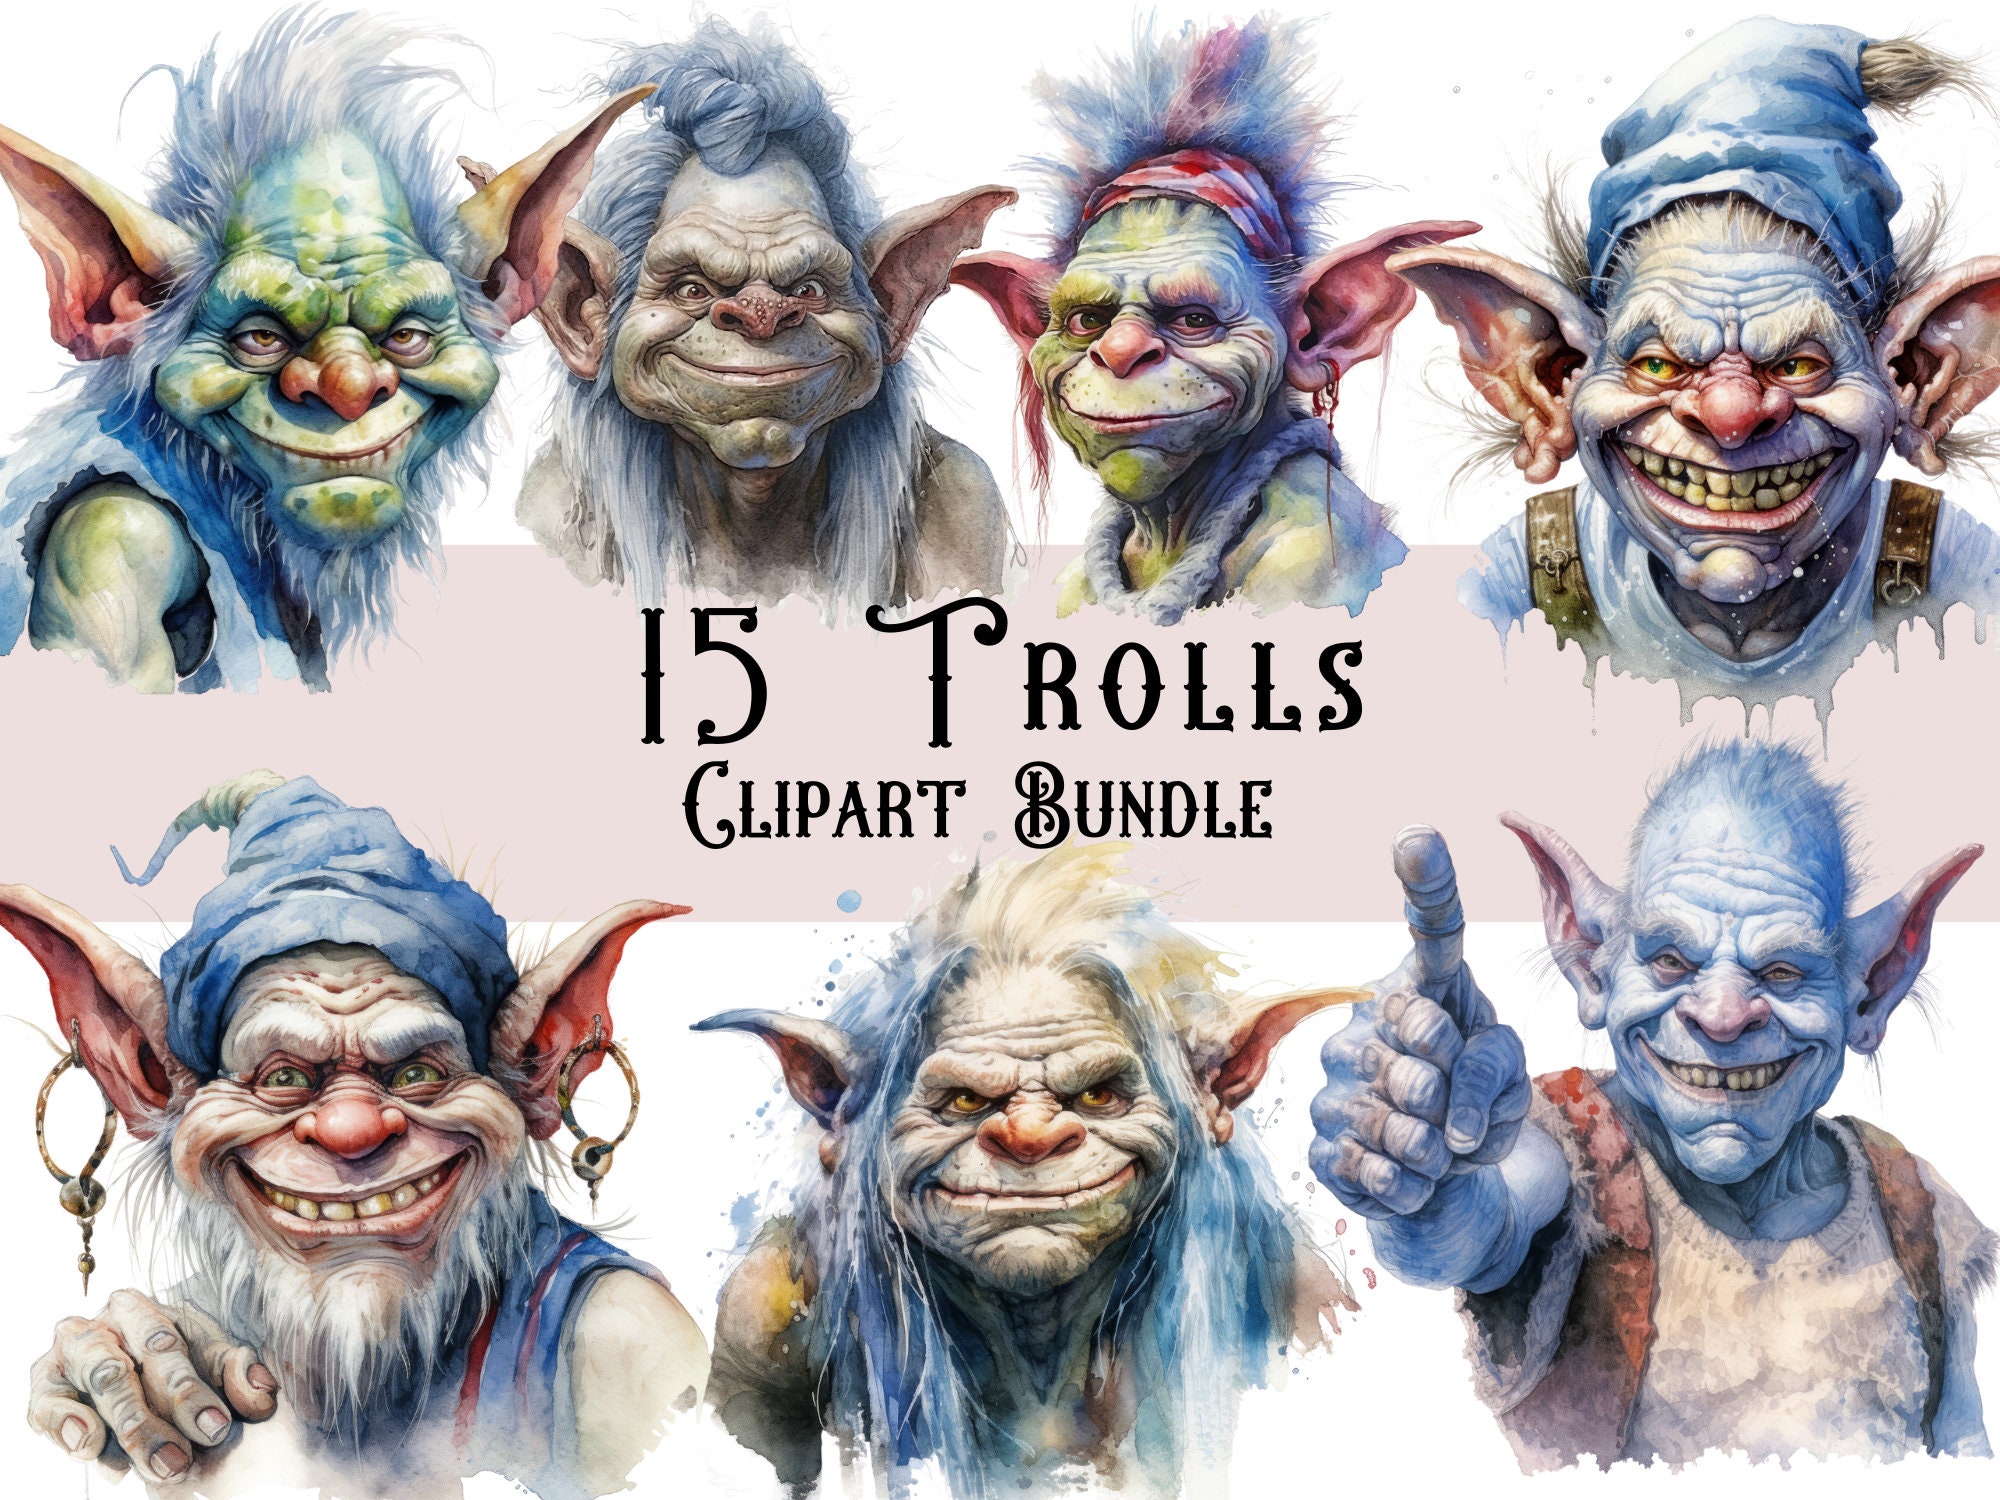 Troll face clipart. Free download transparent .PNG